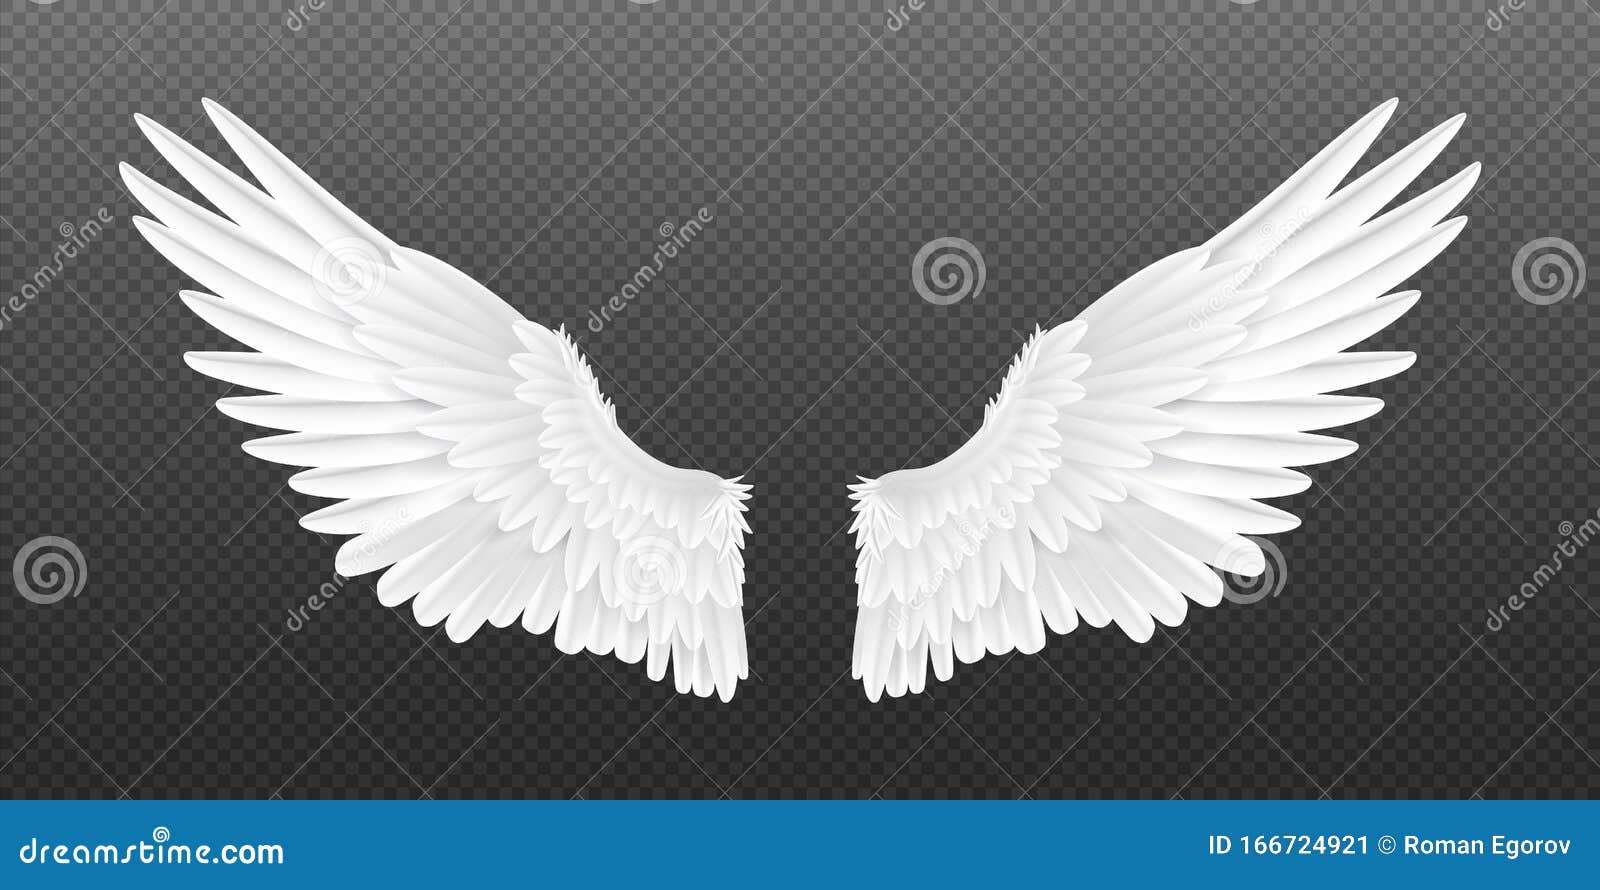 realistic angel wings. white  pair of falcon wings, 3d bird wings  template.  concept